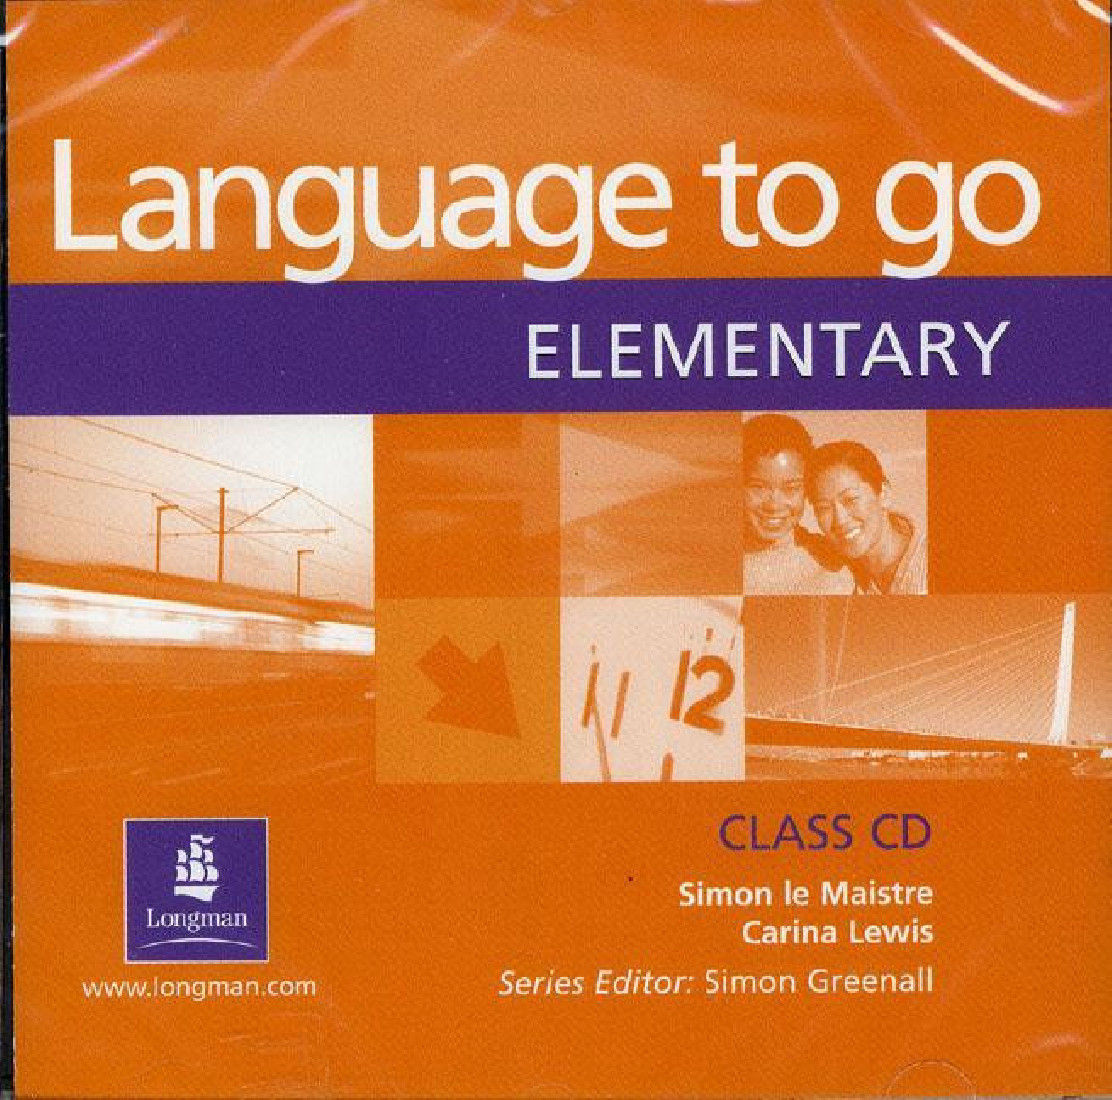 LANGUAGE TO GO ELEMENTARY CLASS CD (1)